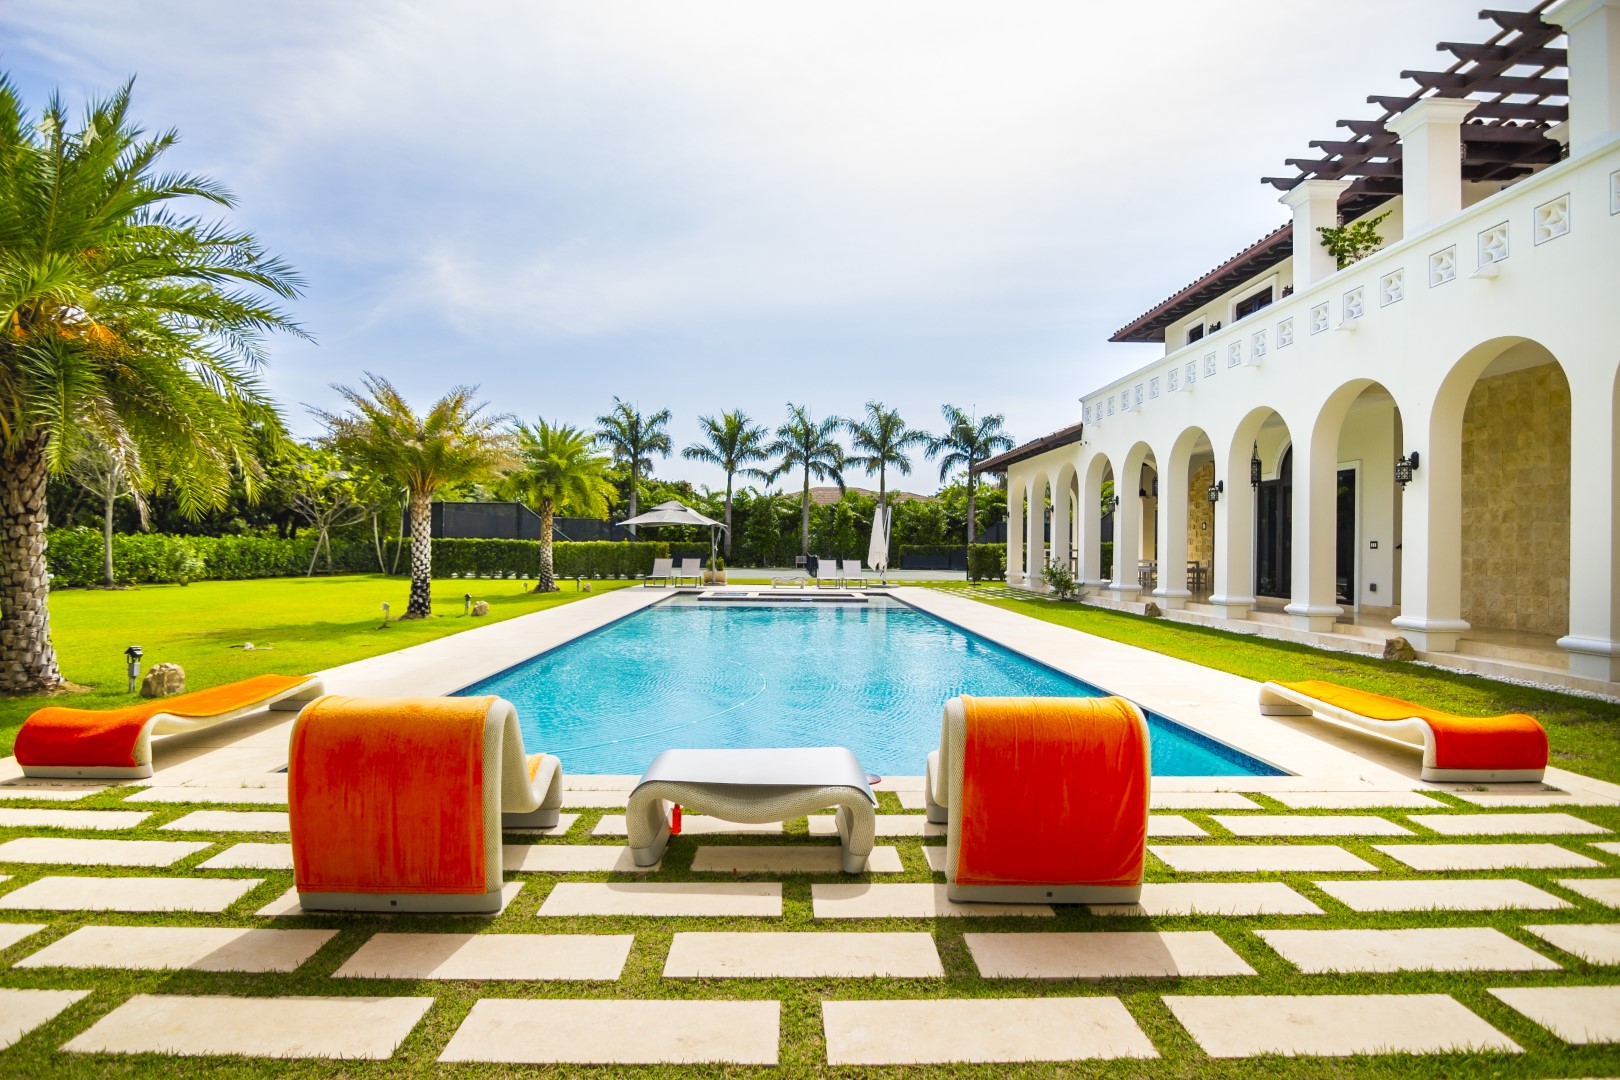 Exactly Who Is Going to Buy Your Luxury Home in Miami?